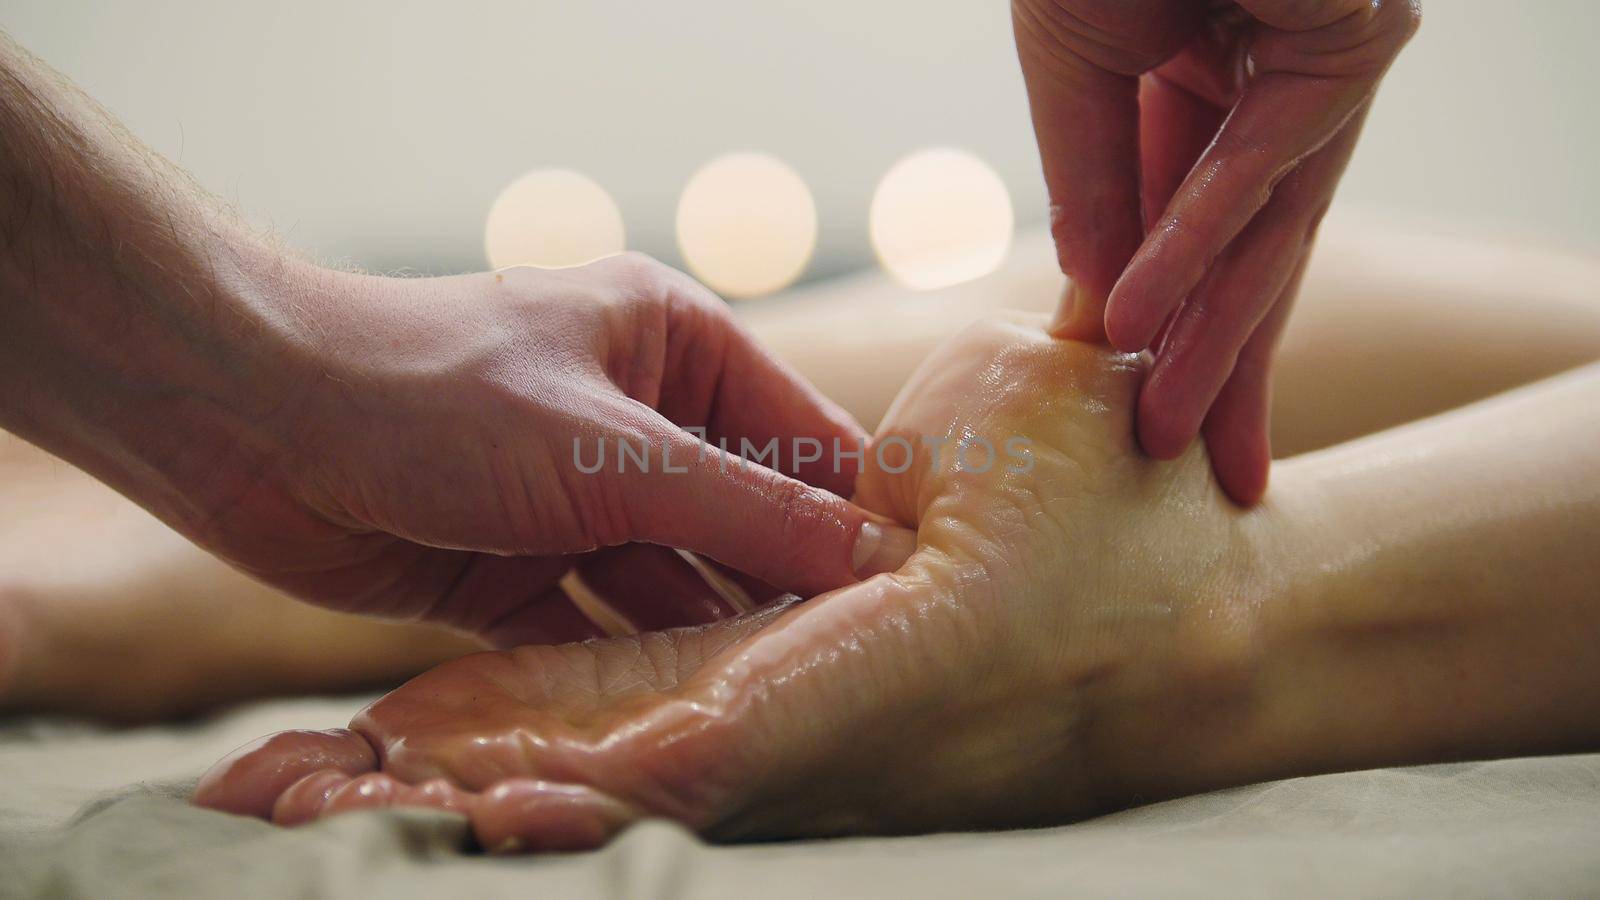 Oil massage for heel on the leg. Relaxation treatment for young female, close up, close up view